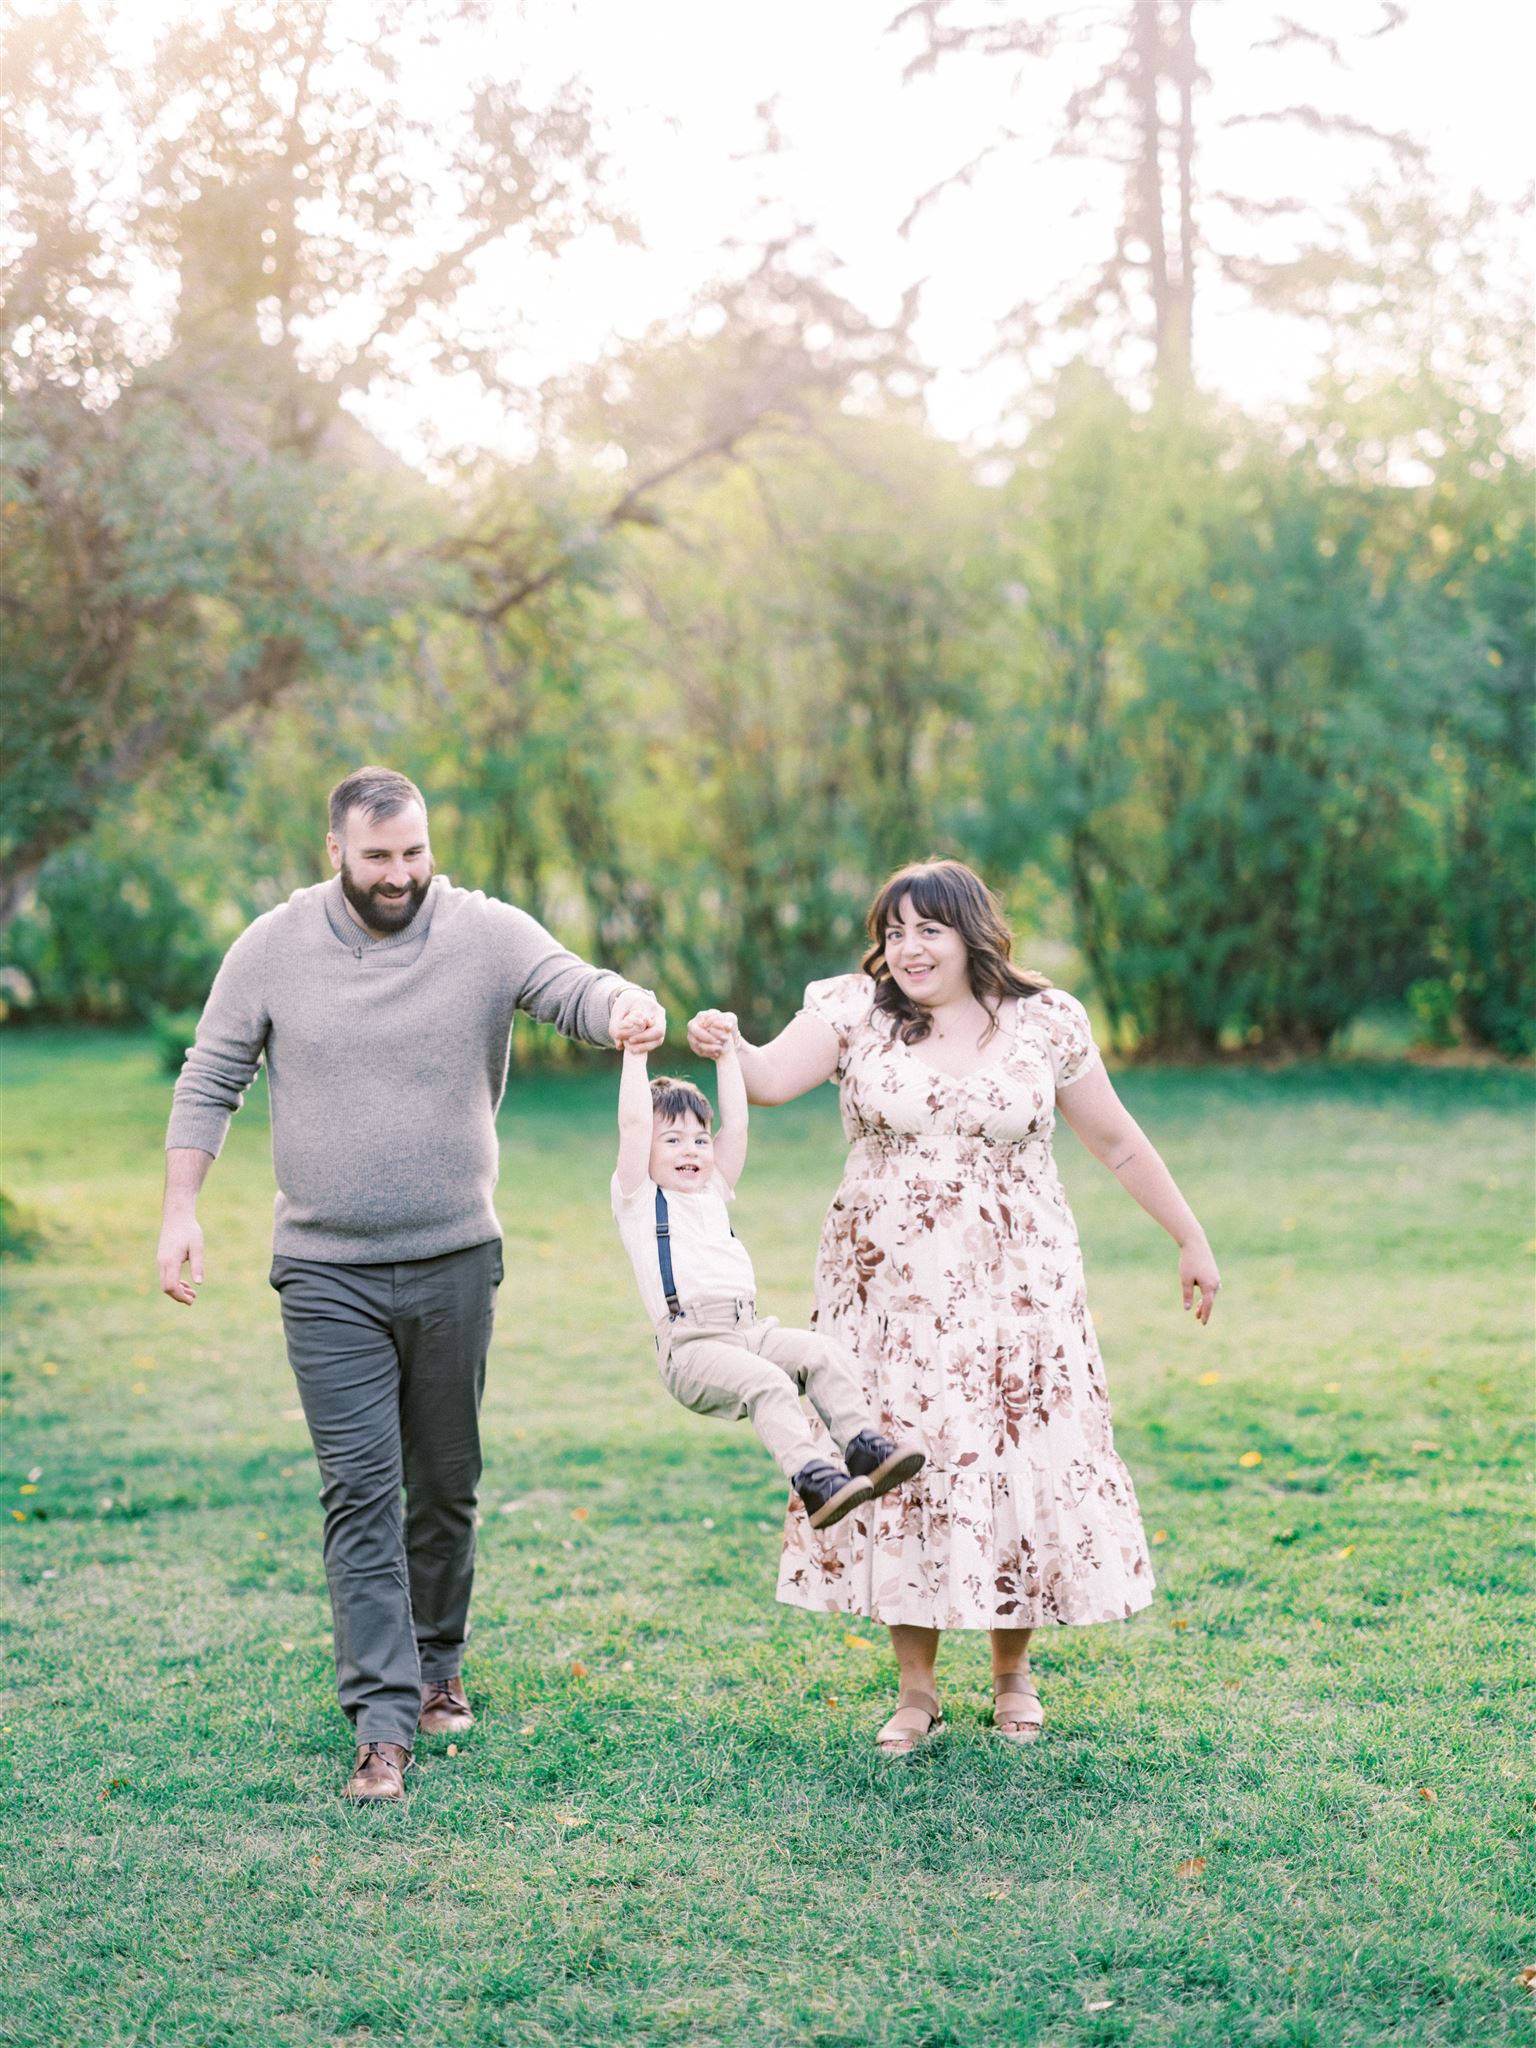 Bow Valley Fall Family Photographer Nicole Sarah, family photos calgary, fall family photo outfits, family photo inspiration, fall wardrobe photos, family smiling fall photos, affordable family photos, fall minis, mom and dad holding toddler, family photo poses